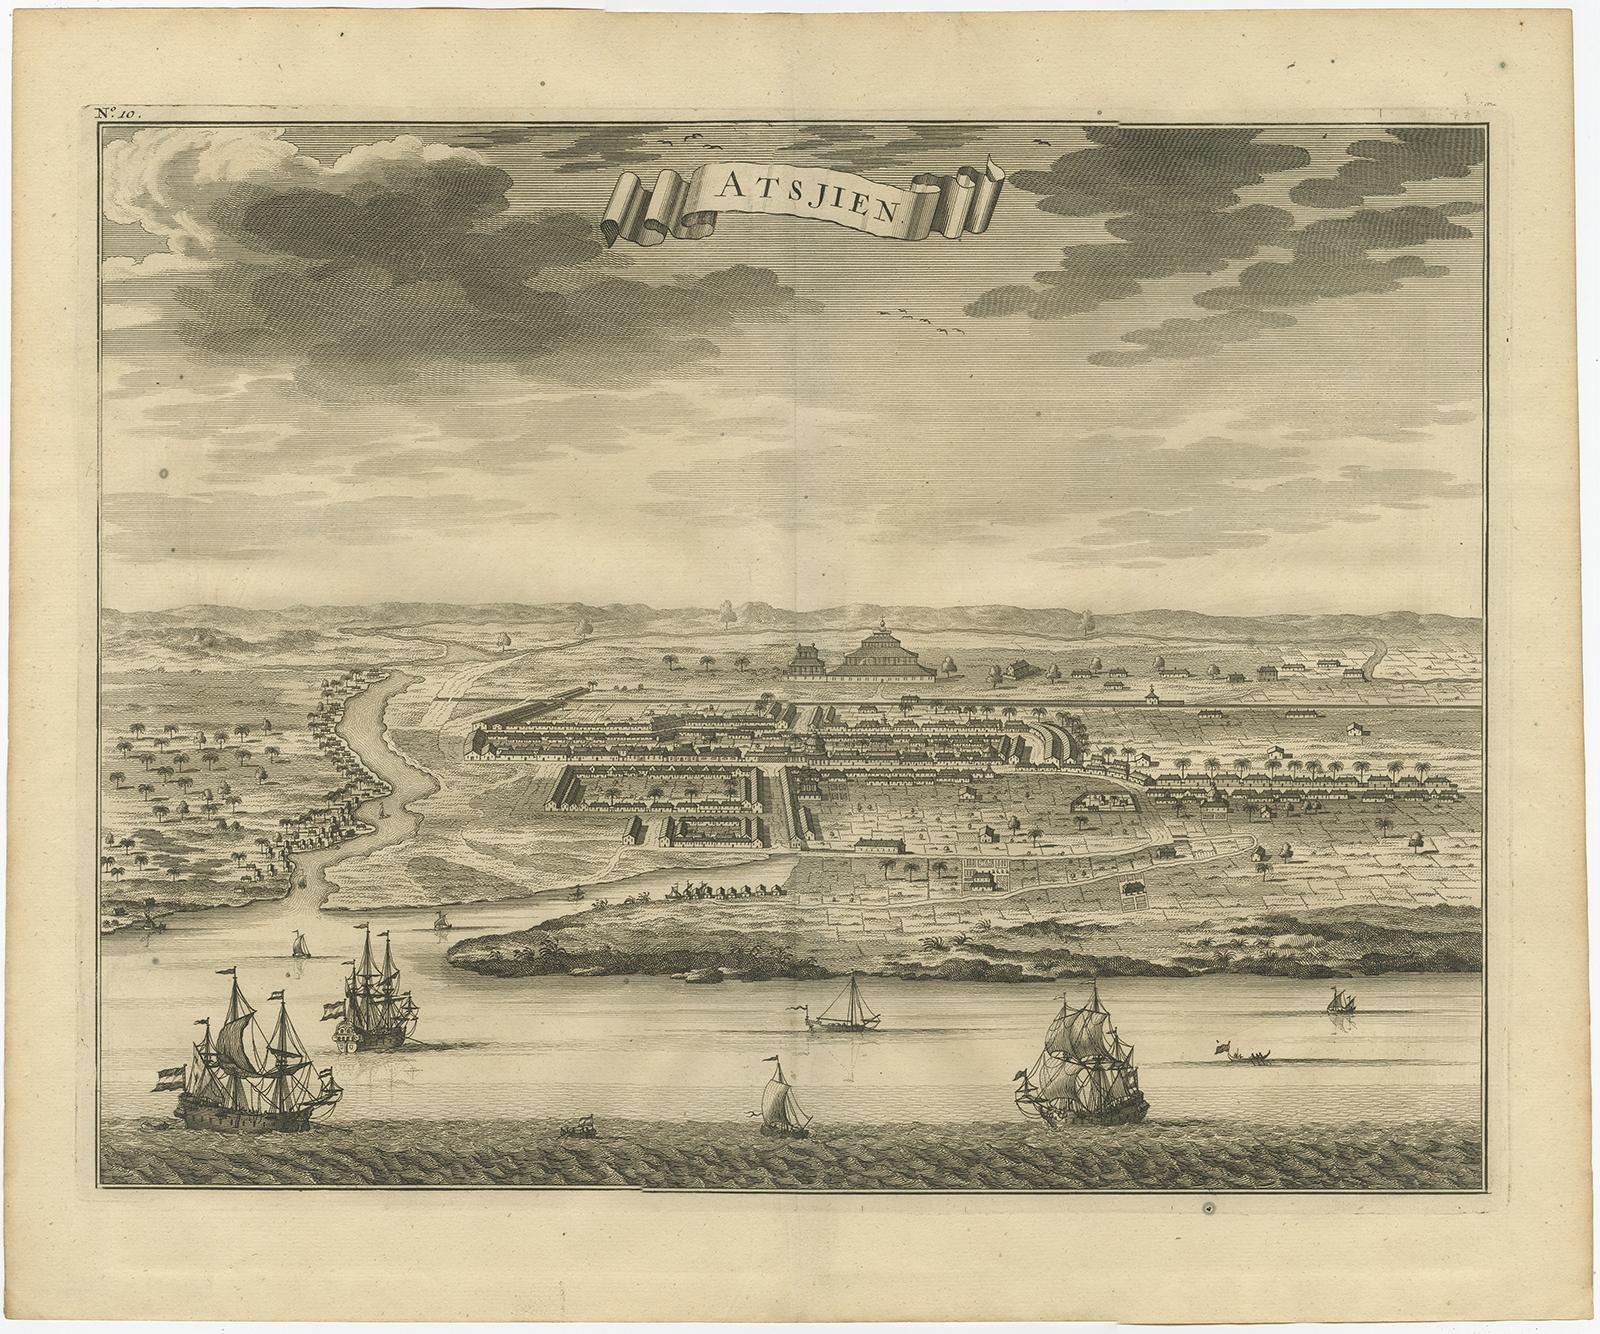 Description: Antique print Indonesia titled 'Atsjien'. Bird's eye-view of the Town of Atjien on the northernmost point of Sumatra. This print originates from 'Oud en Nieuw Oost-Indiën' by F. Valentijn.

Artists and Engravers: François Valentijn